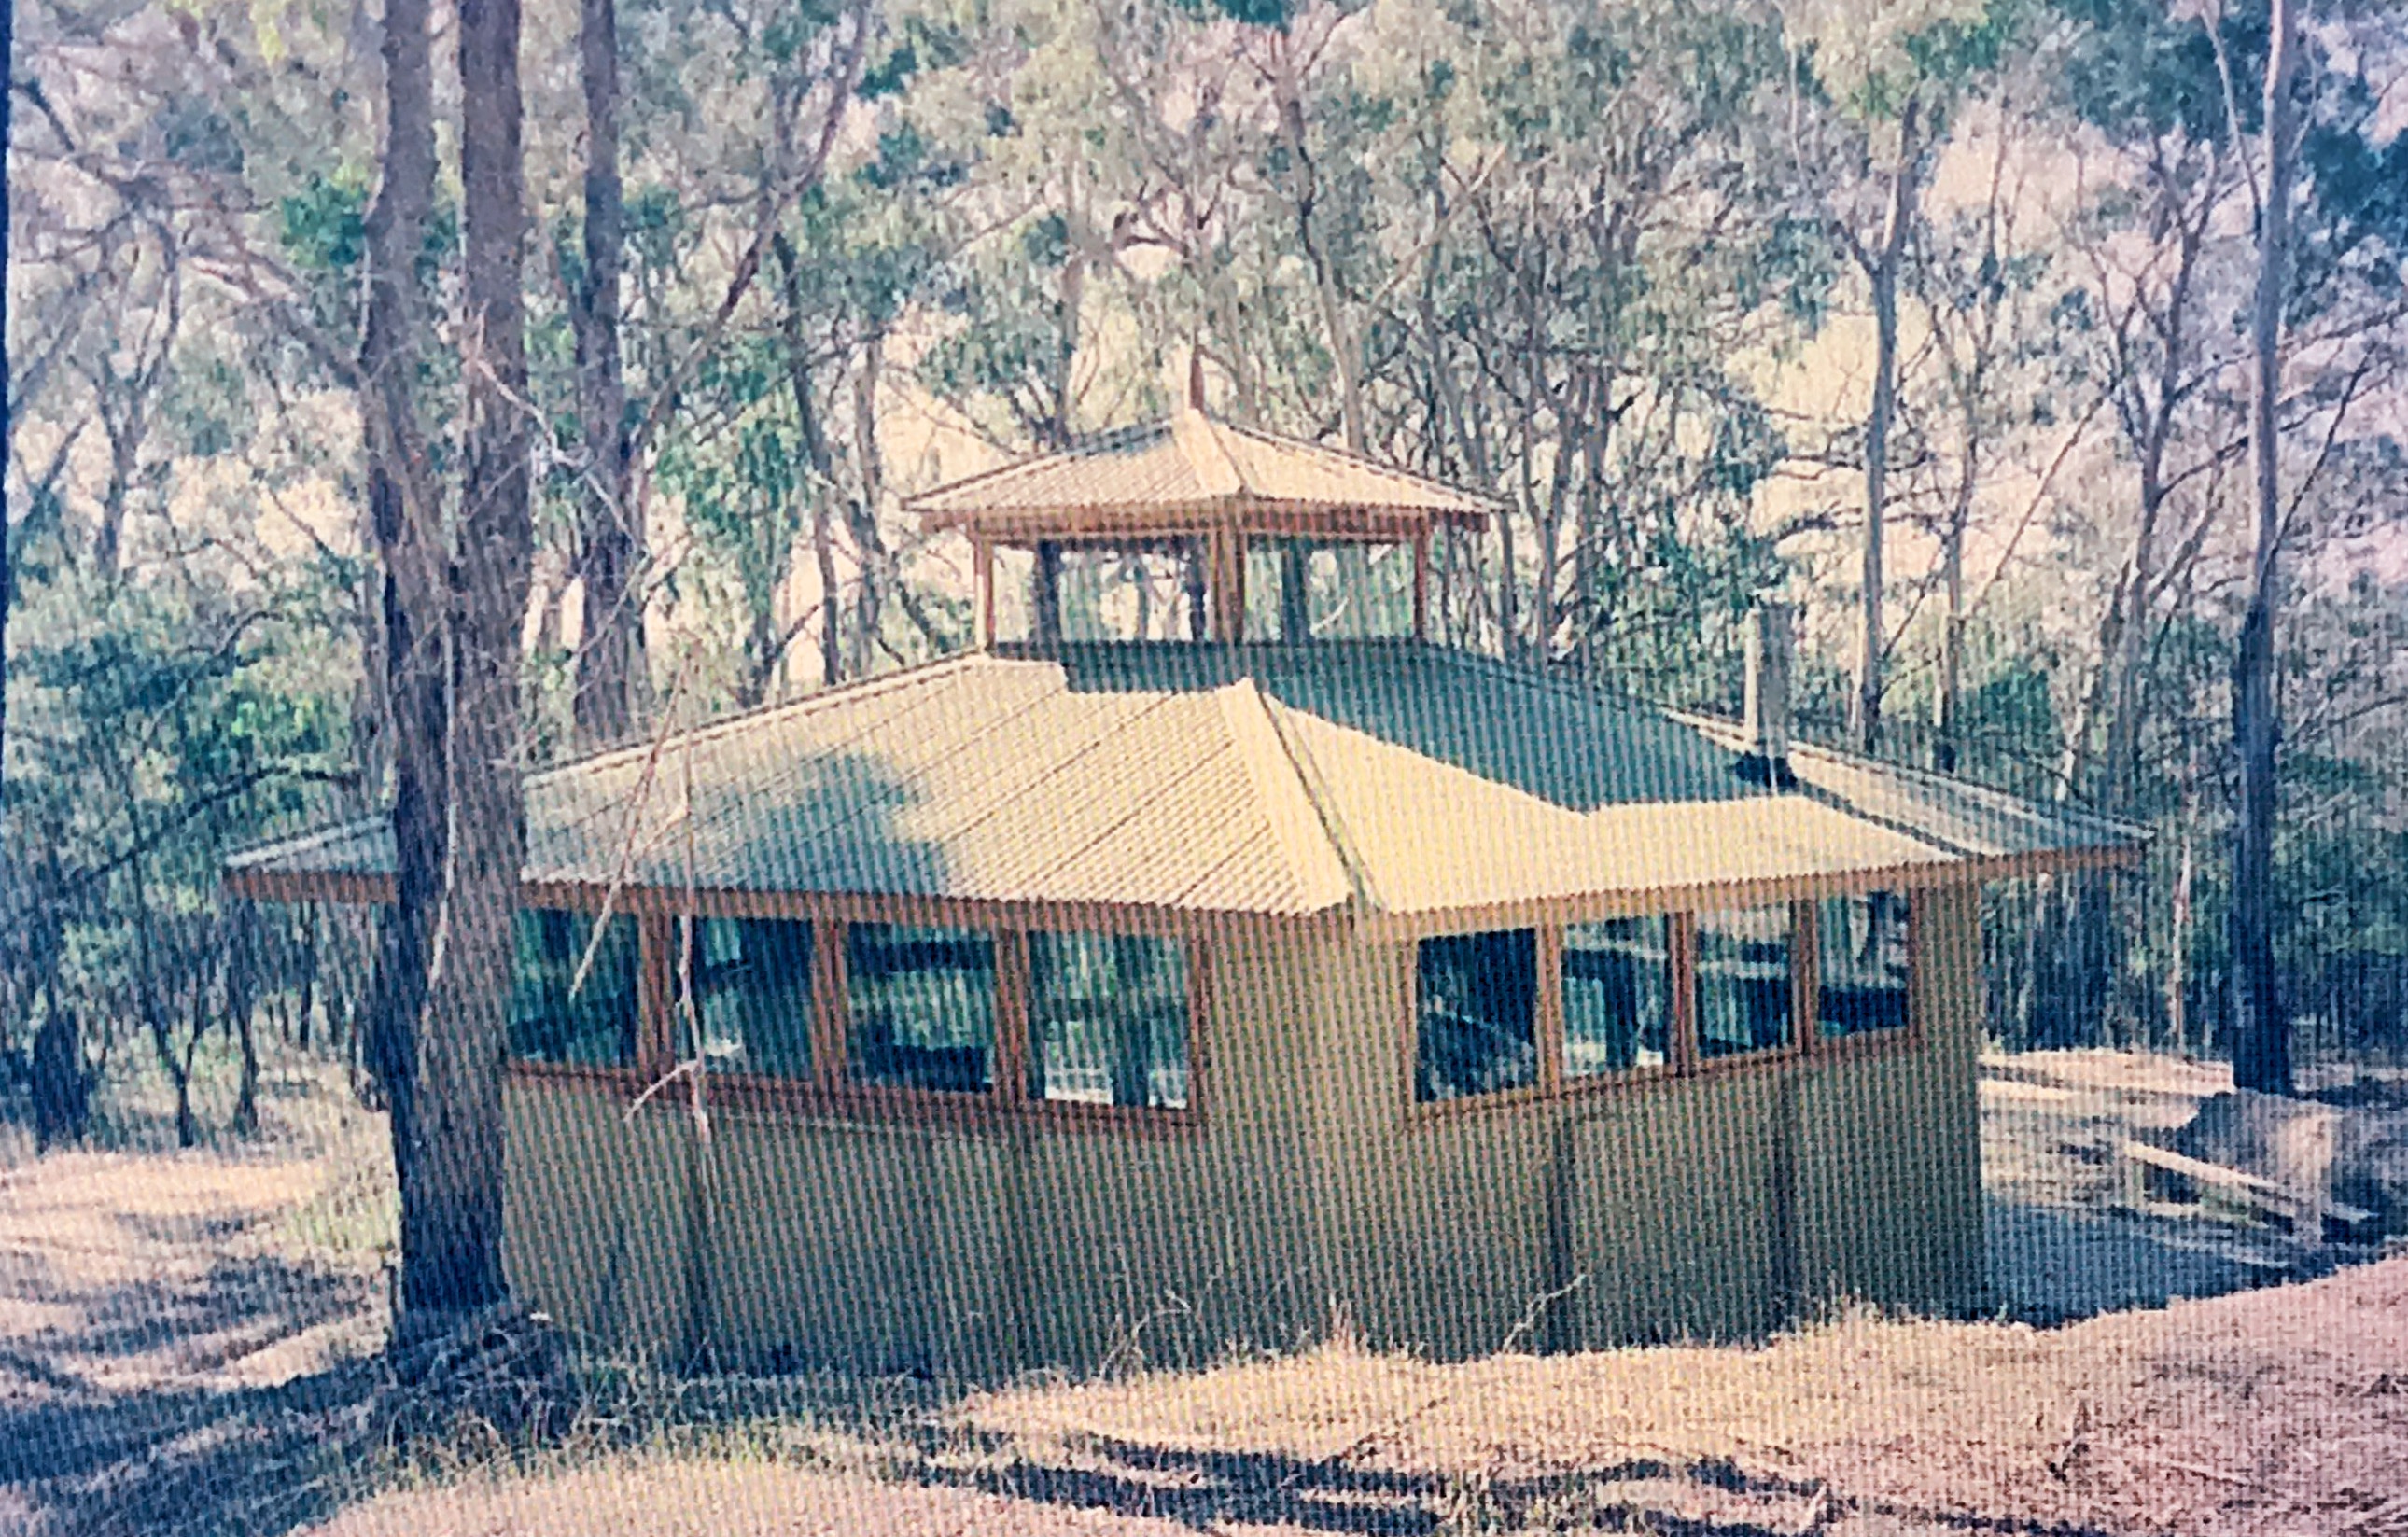 The Coorabin Temple Built in about 1994-5 Pentagonal format with Reciprocal supported roof  With steel collar-tie wall surround. Mudbrick on quartz based foundations. Recycled tramway red gum block floor and Recycled Double glazed windows and doors. Recently destroyed by bushfires 22 February 2024